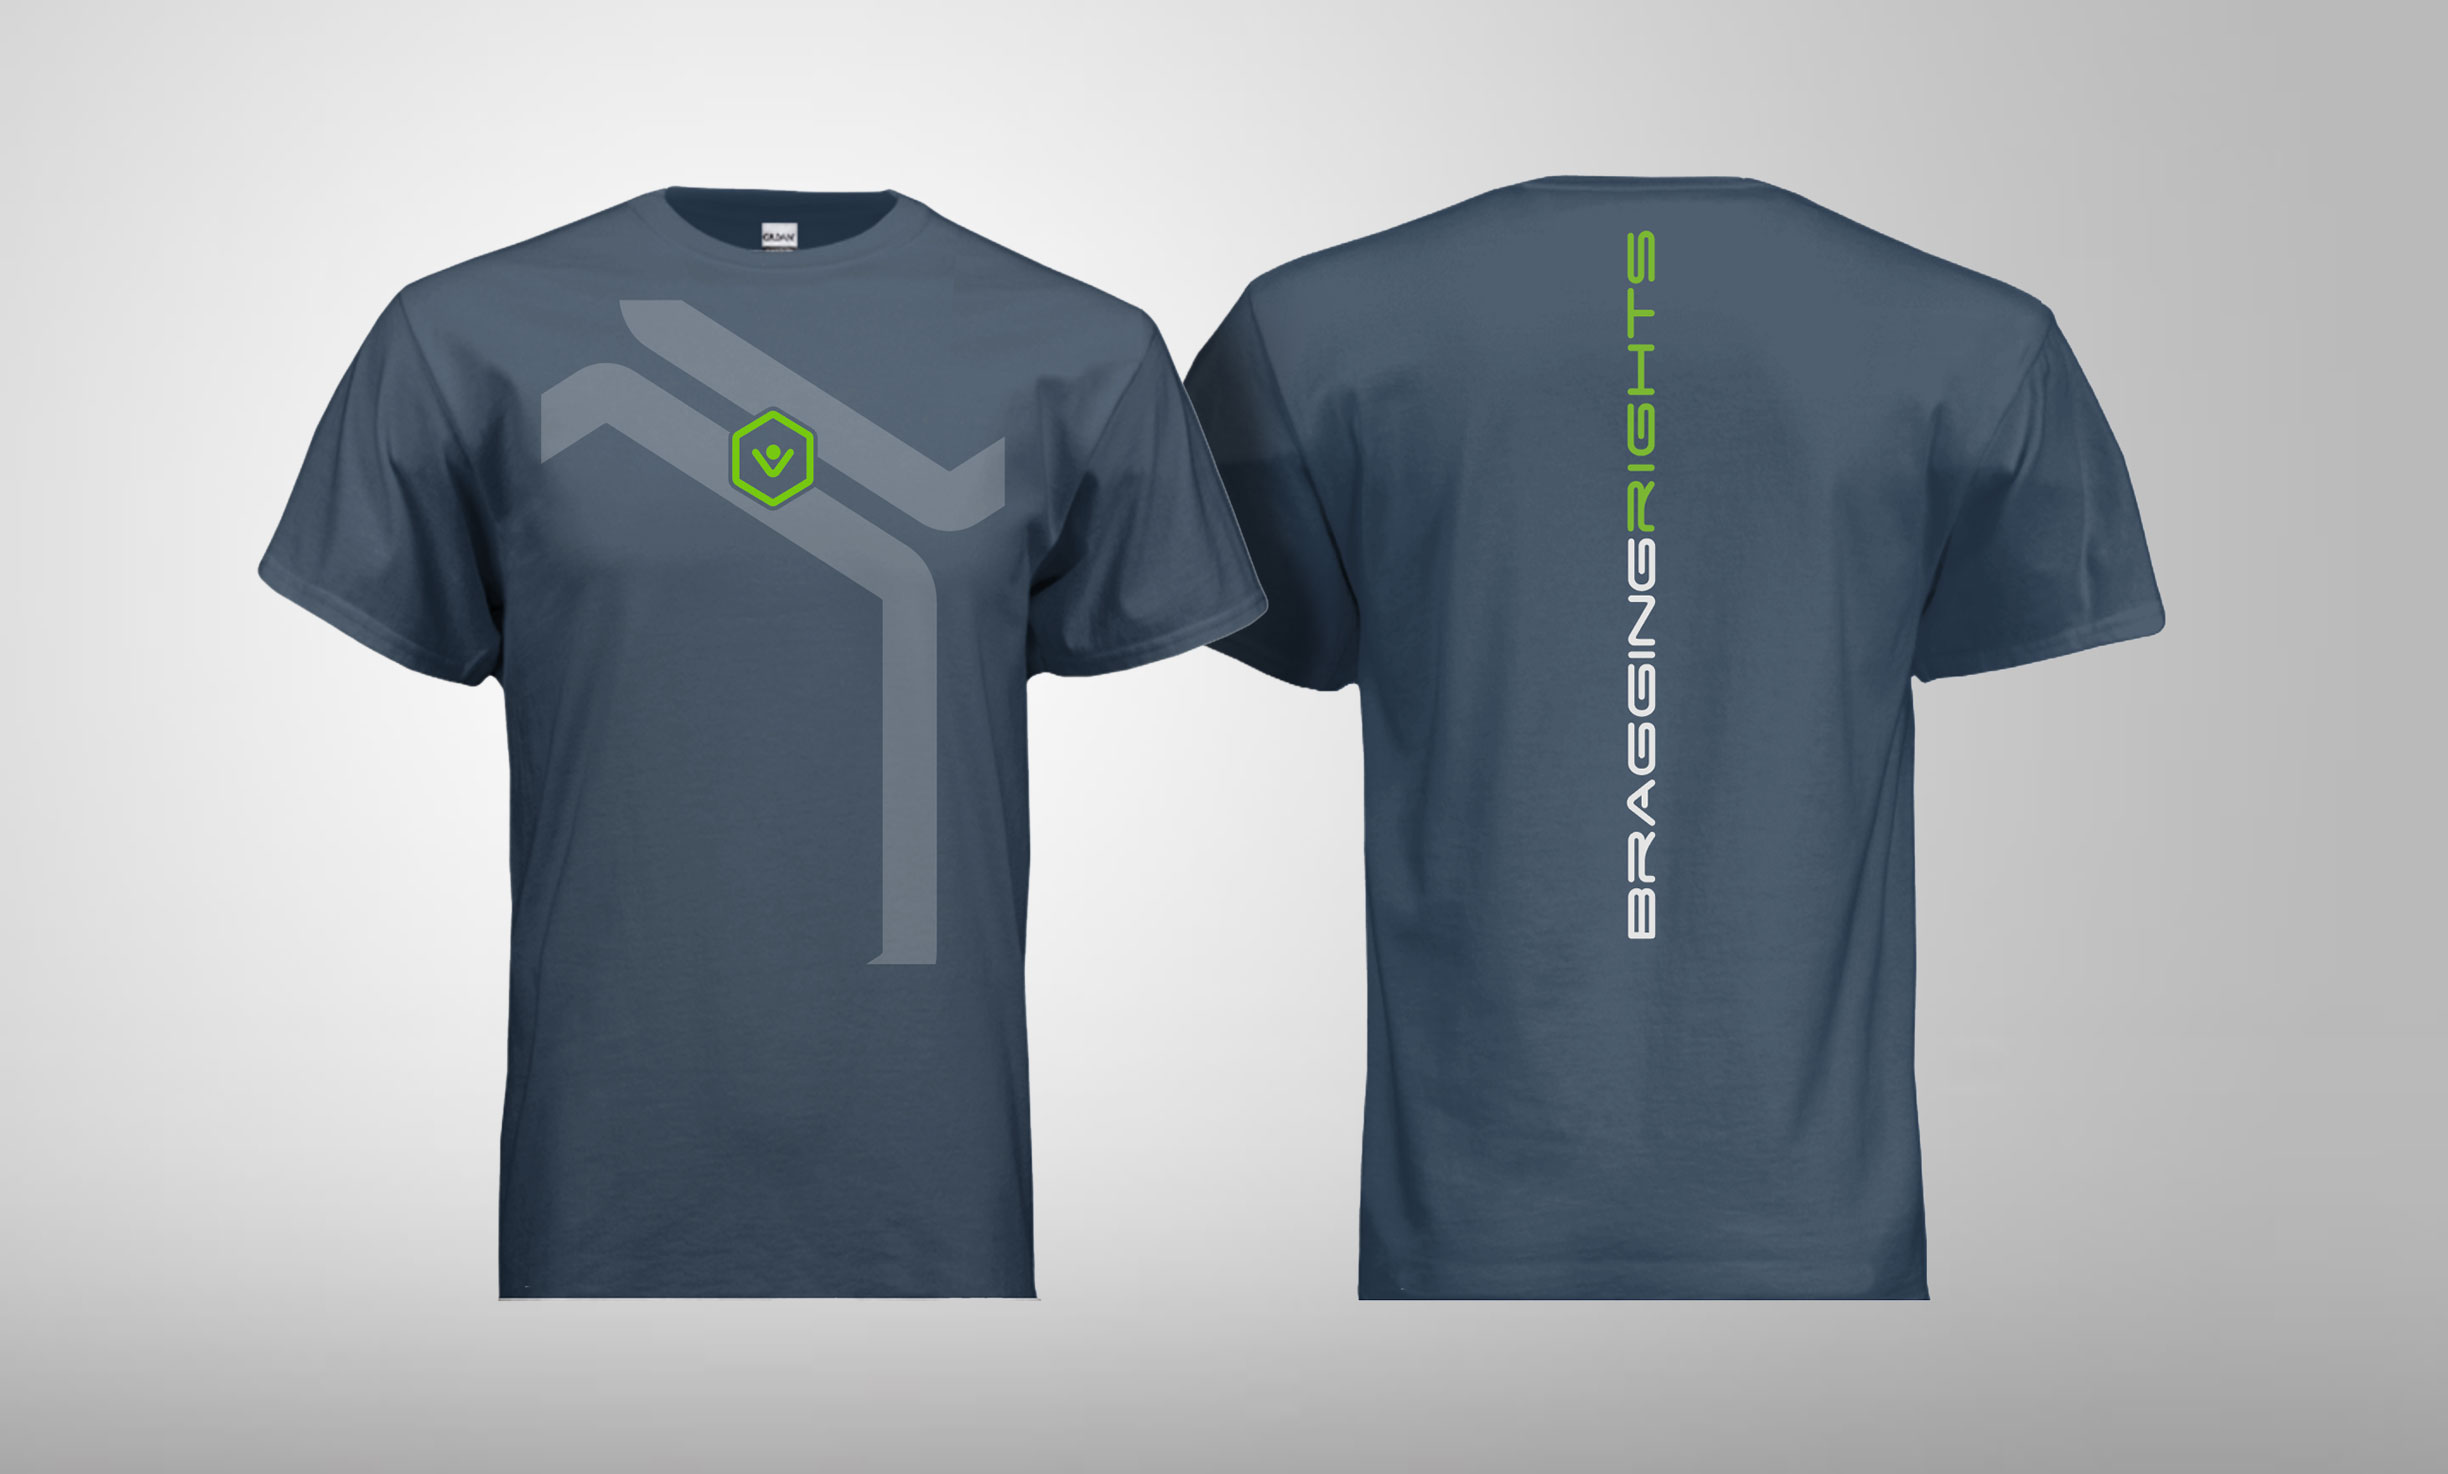 Custom t-shirt and wearables design